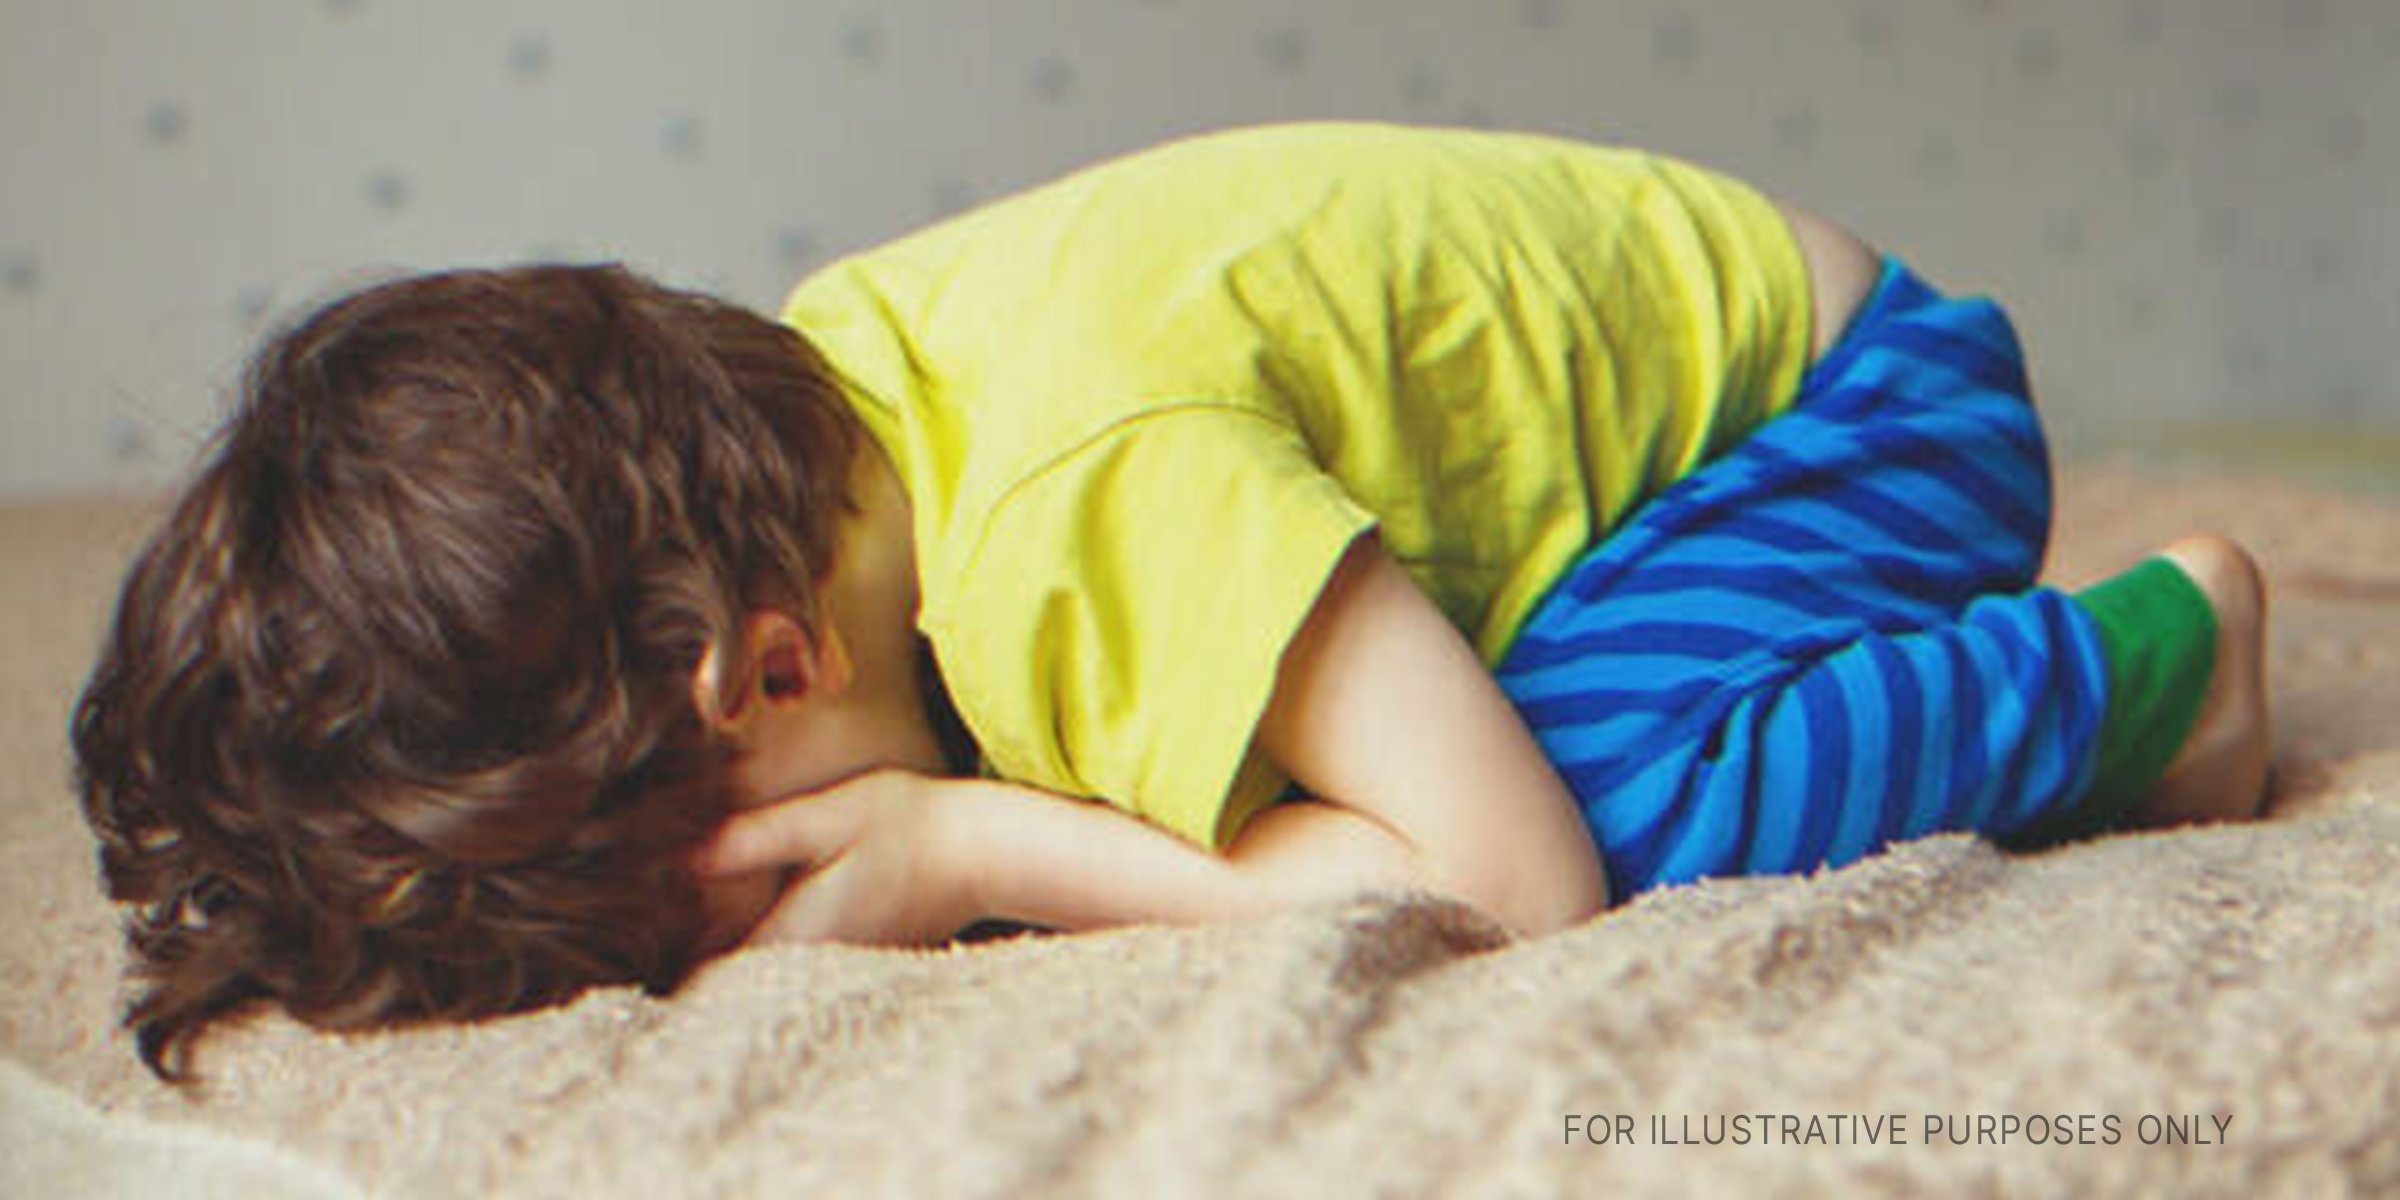 Boy crying in bed. | Source: Shutterstock